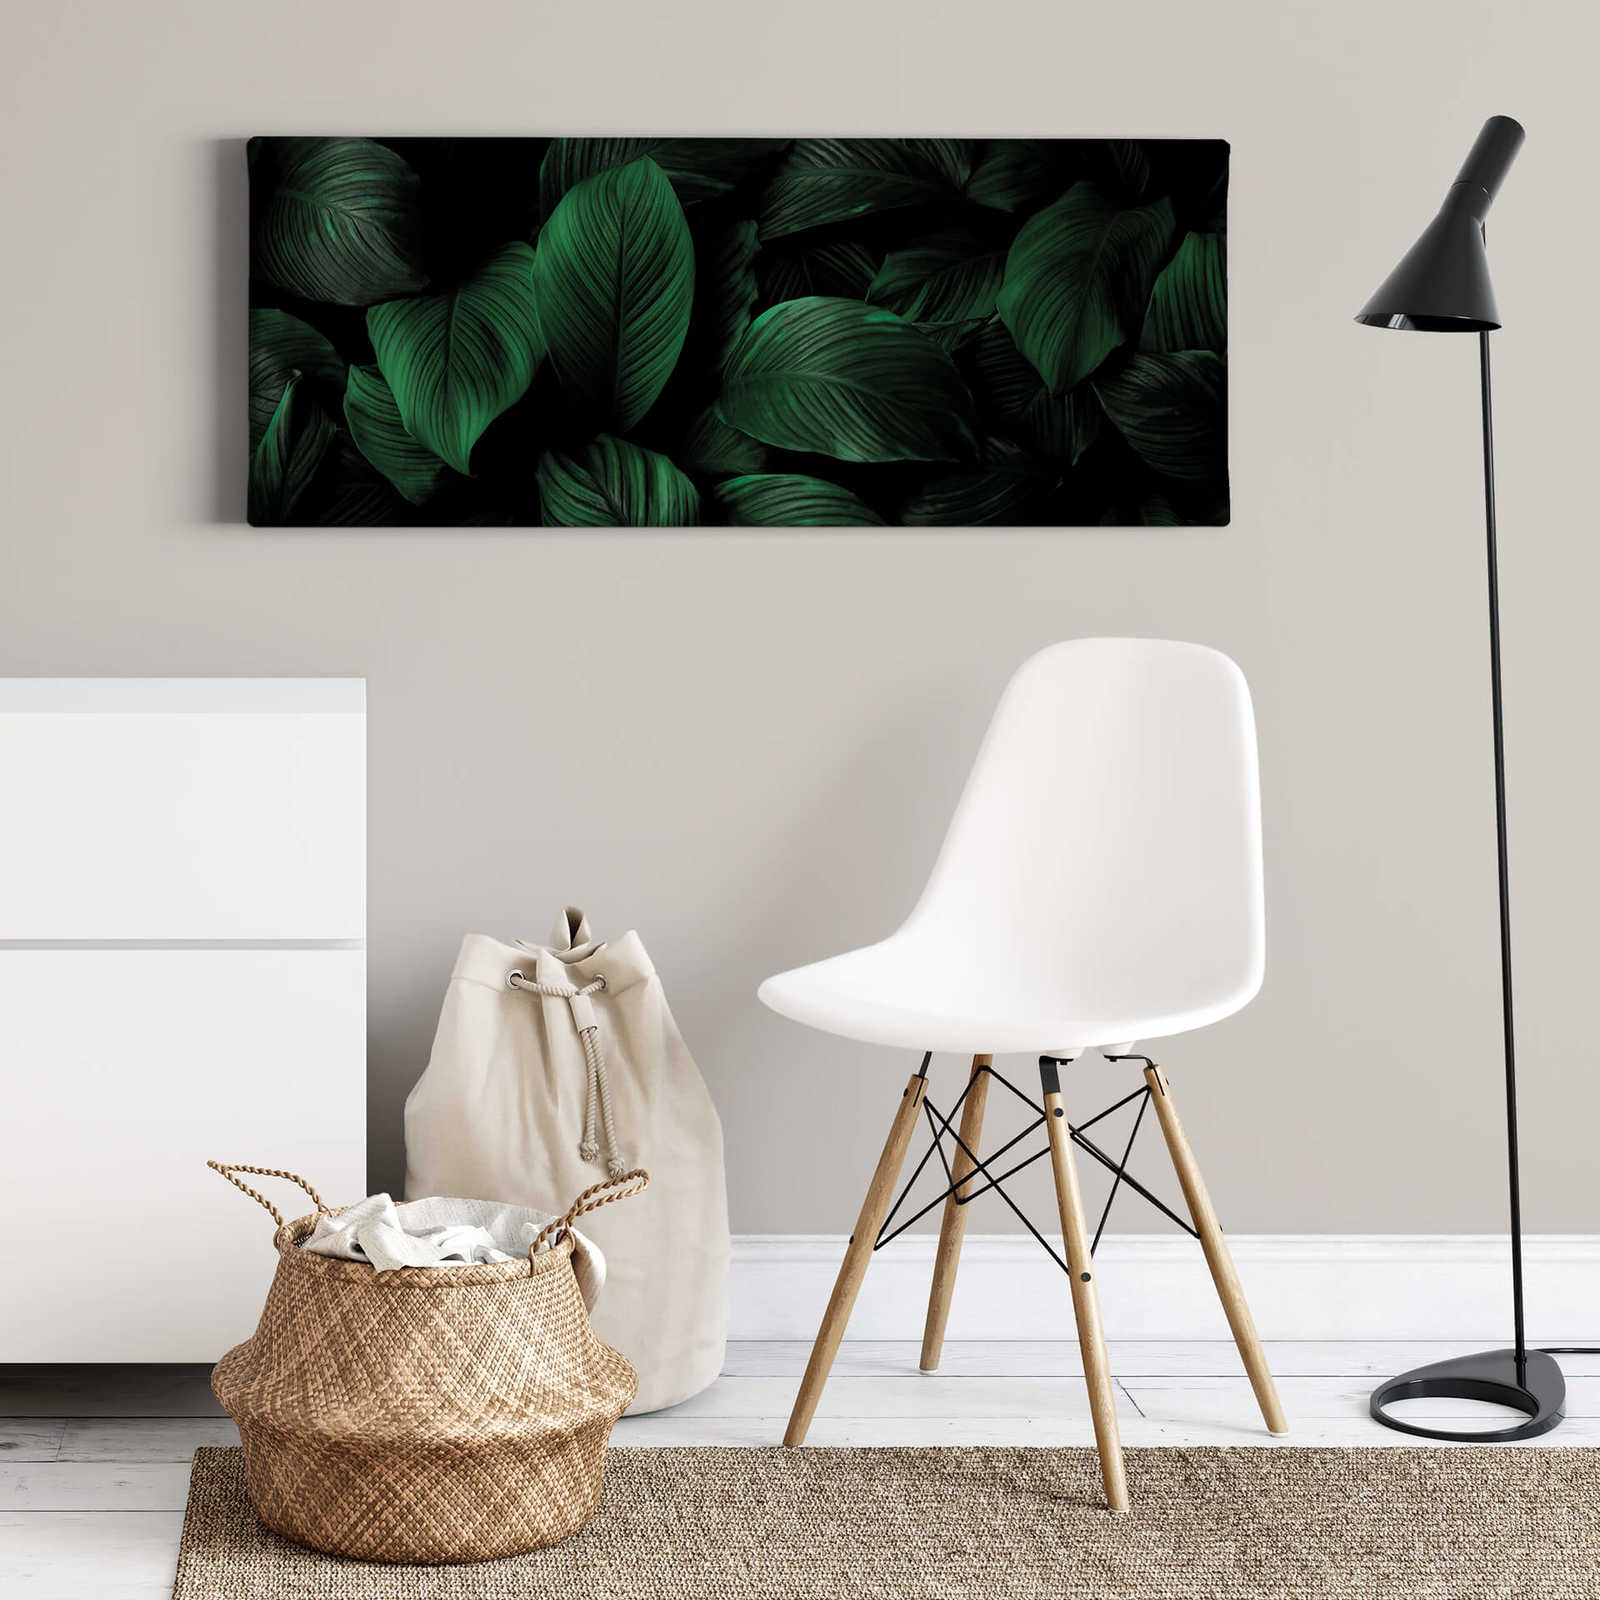             Panorama canvas print with leaf optics in green, black
        